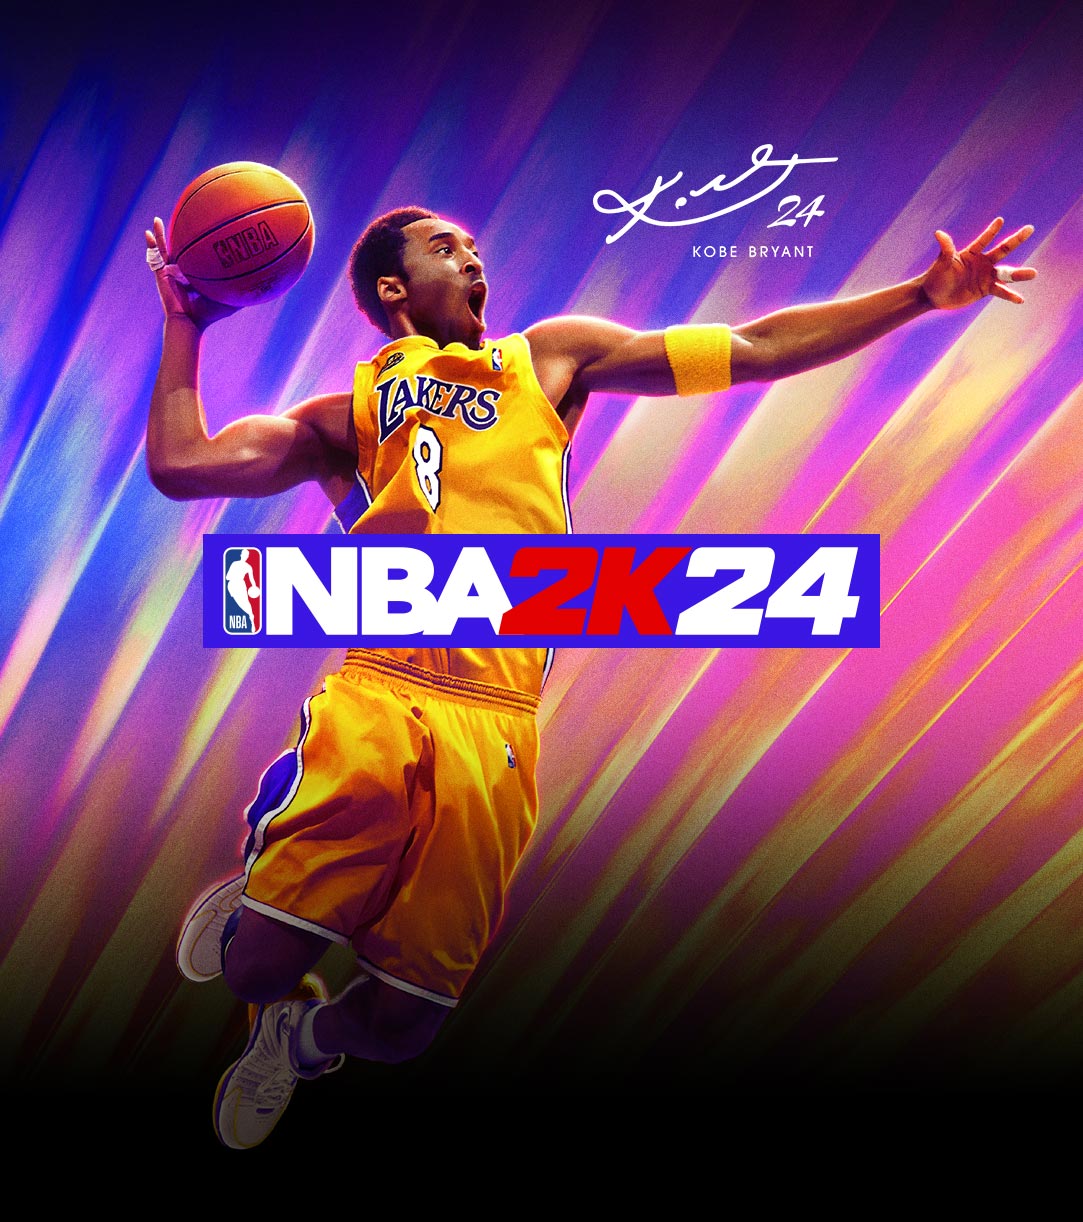 Kobe Bryant in a Lakers shirt leaping up in excitement to make a slam dunk with his signature that incorporates the number 24 featured in the bottom right corner.